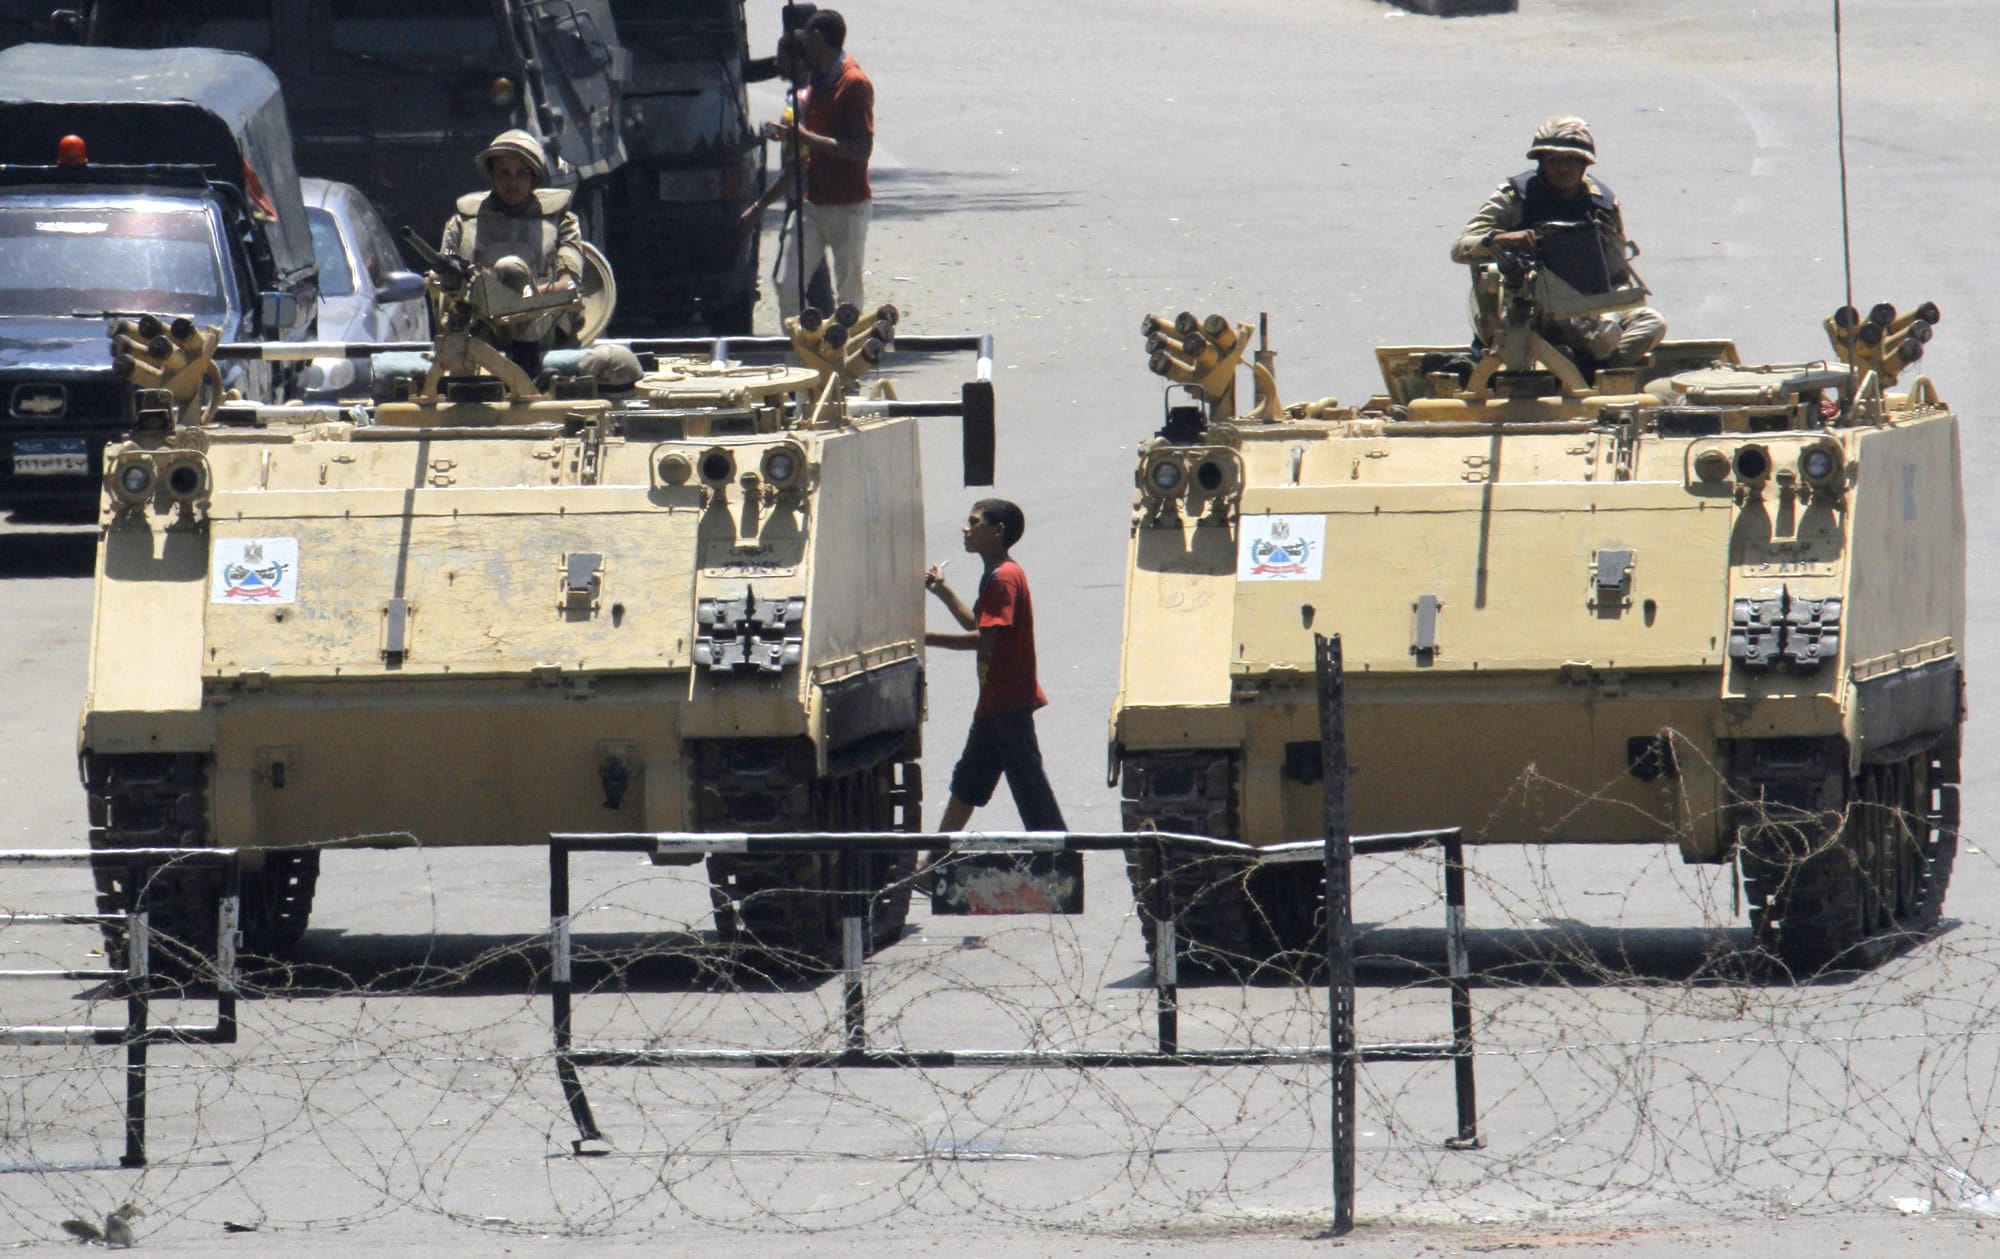 An Egyptian walks between armored vehicles blocking Tahrir Square in Cairo, Egypt, last month.